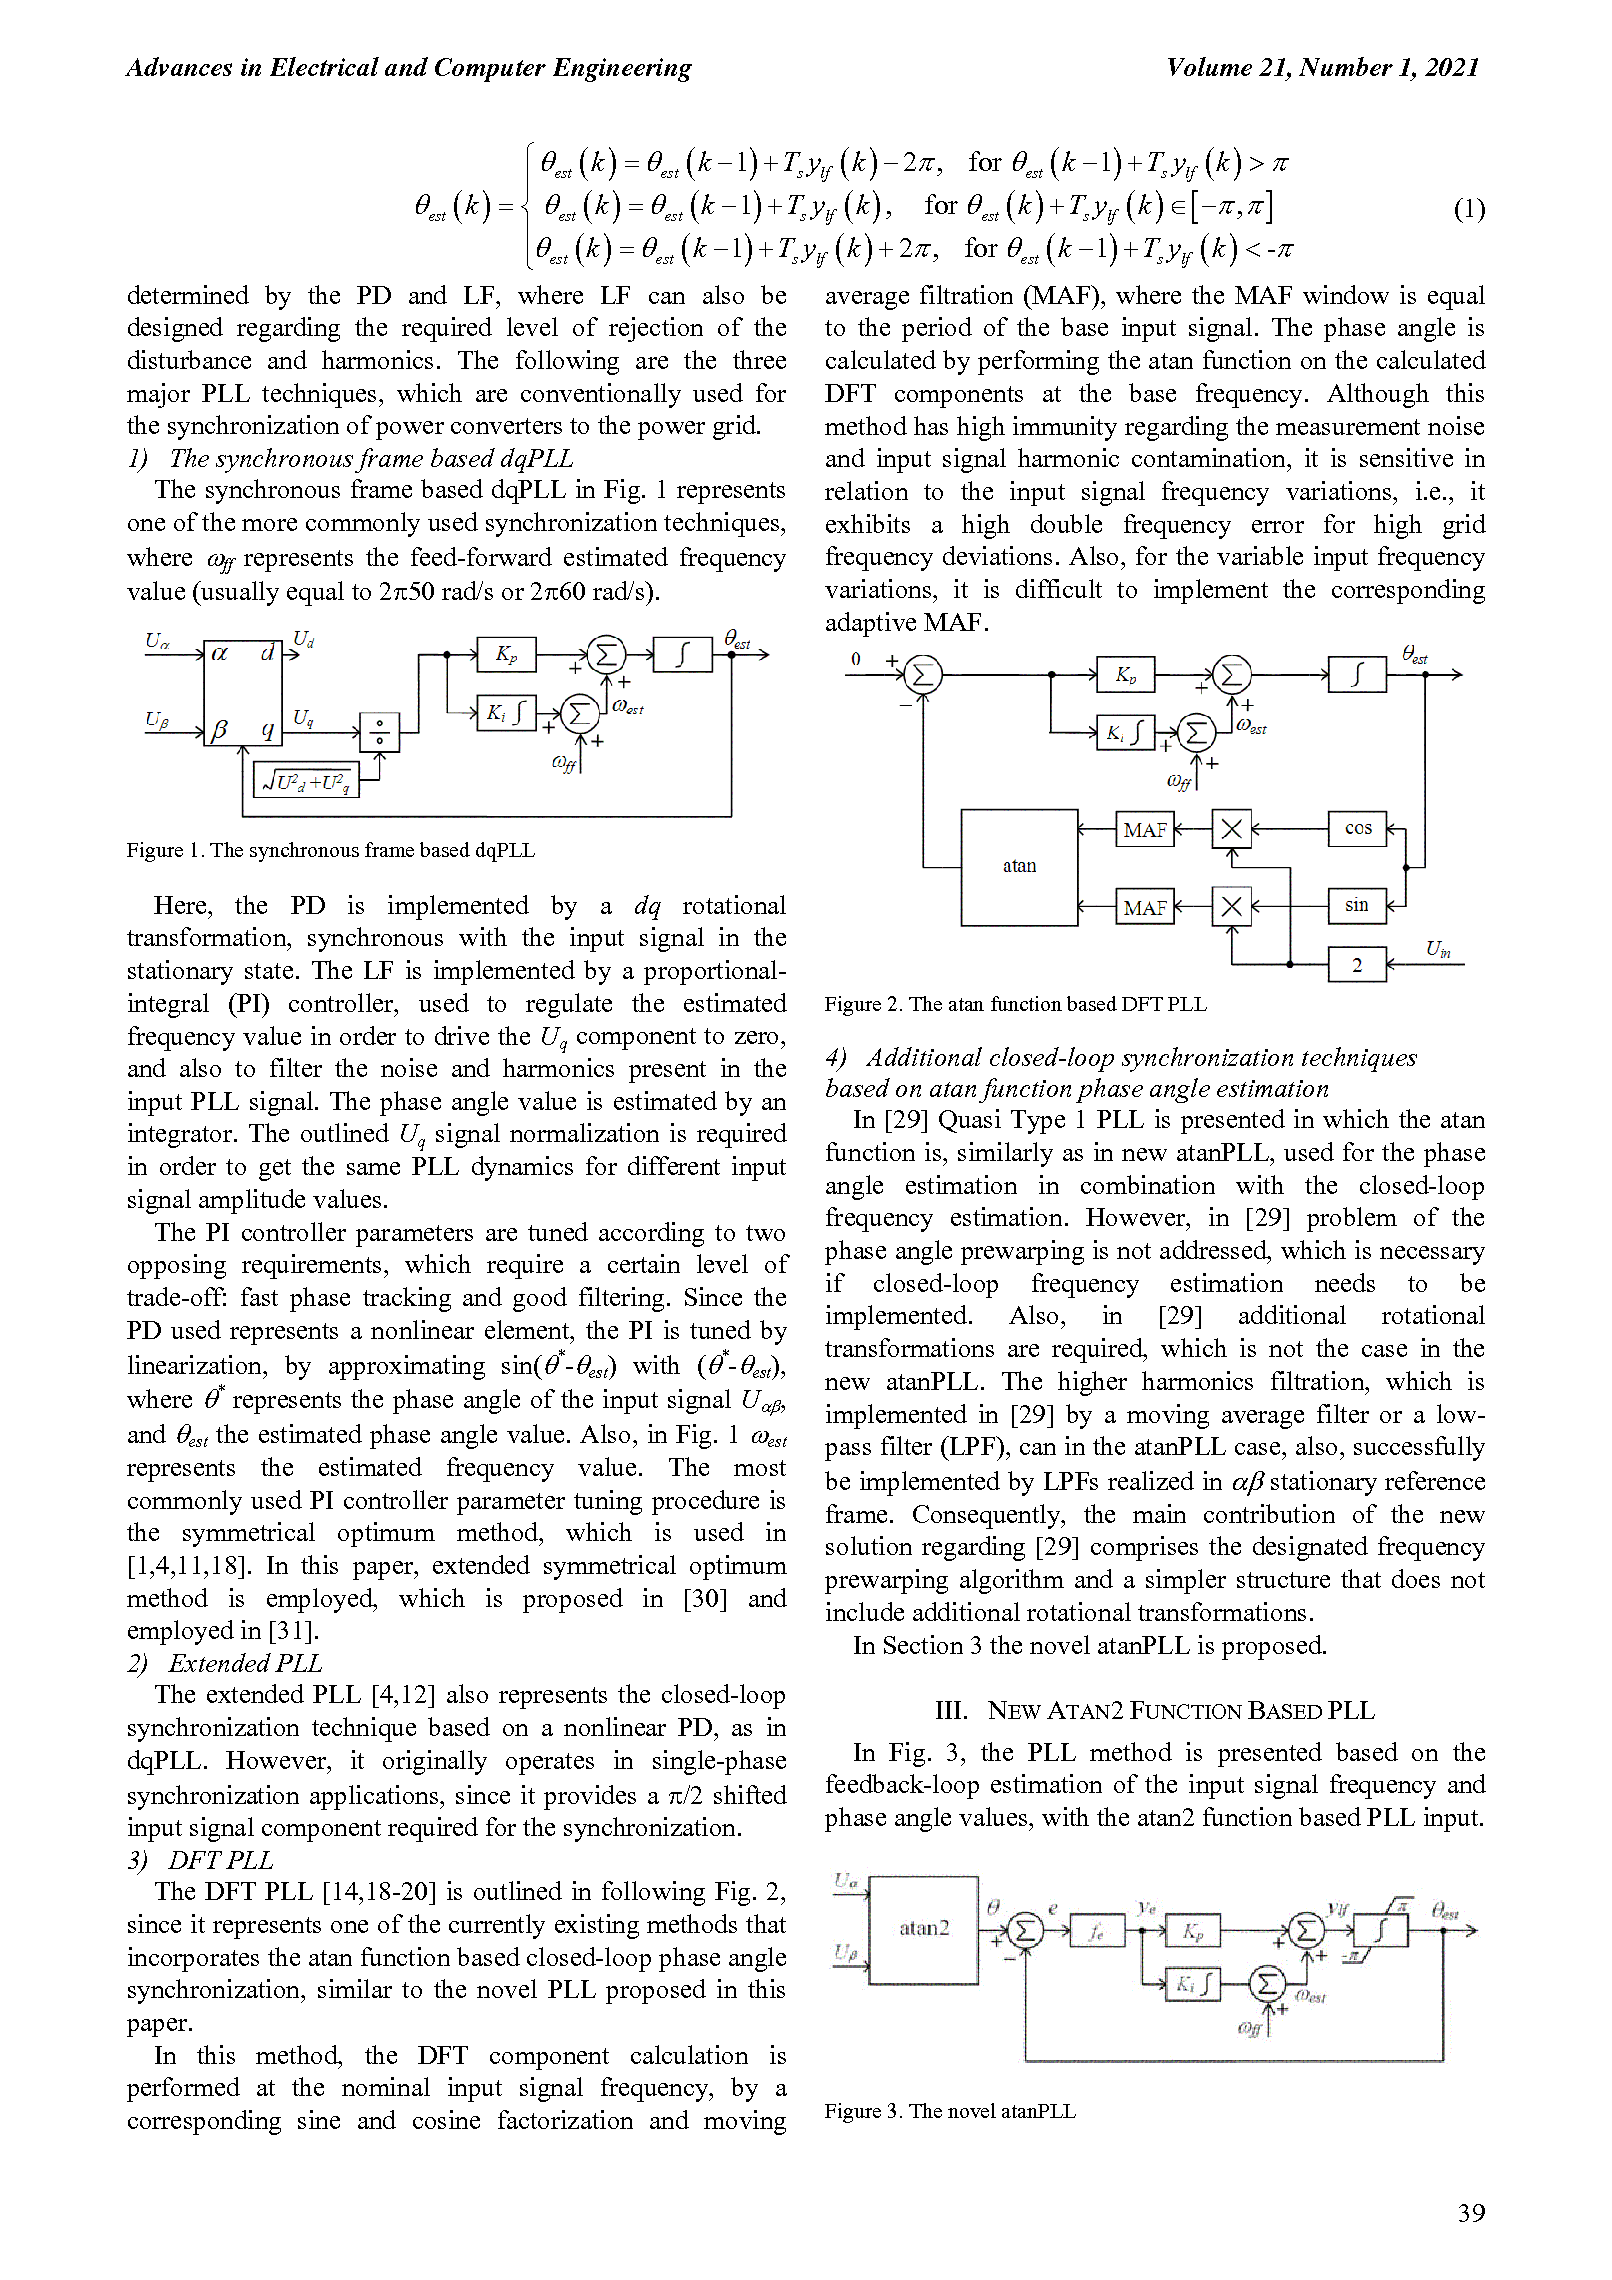 PDF Quickview for paper with DOI:10.4316/AECE.2021.01004